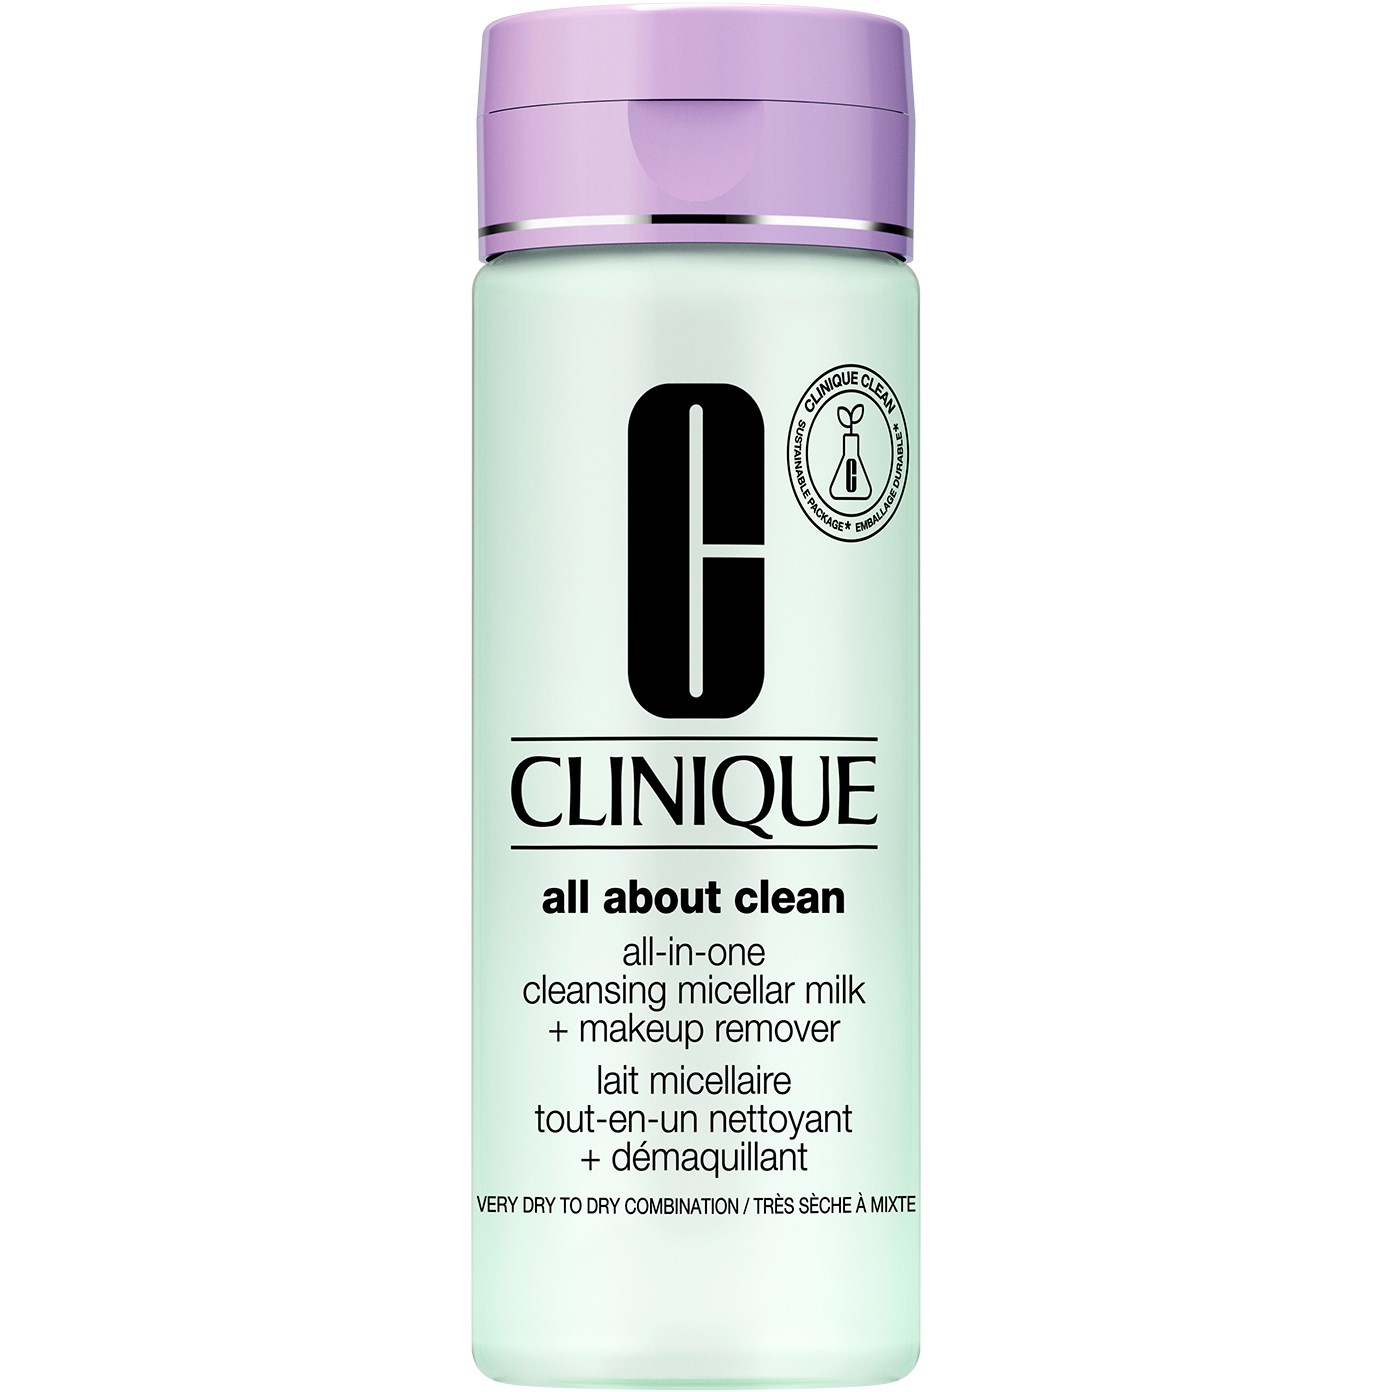 Läs mer om Clinique All-in-One Cleansing Micellar Milk + Makeup Remover